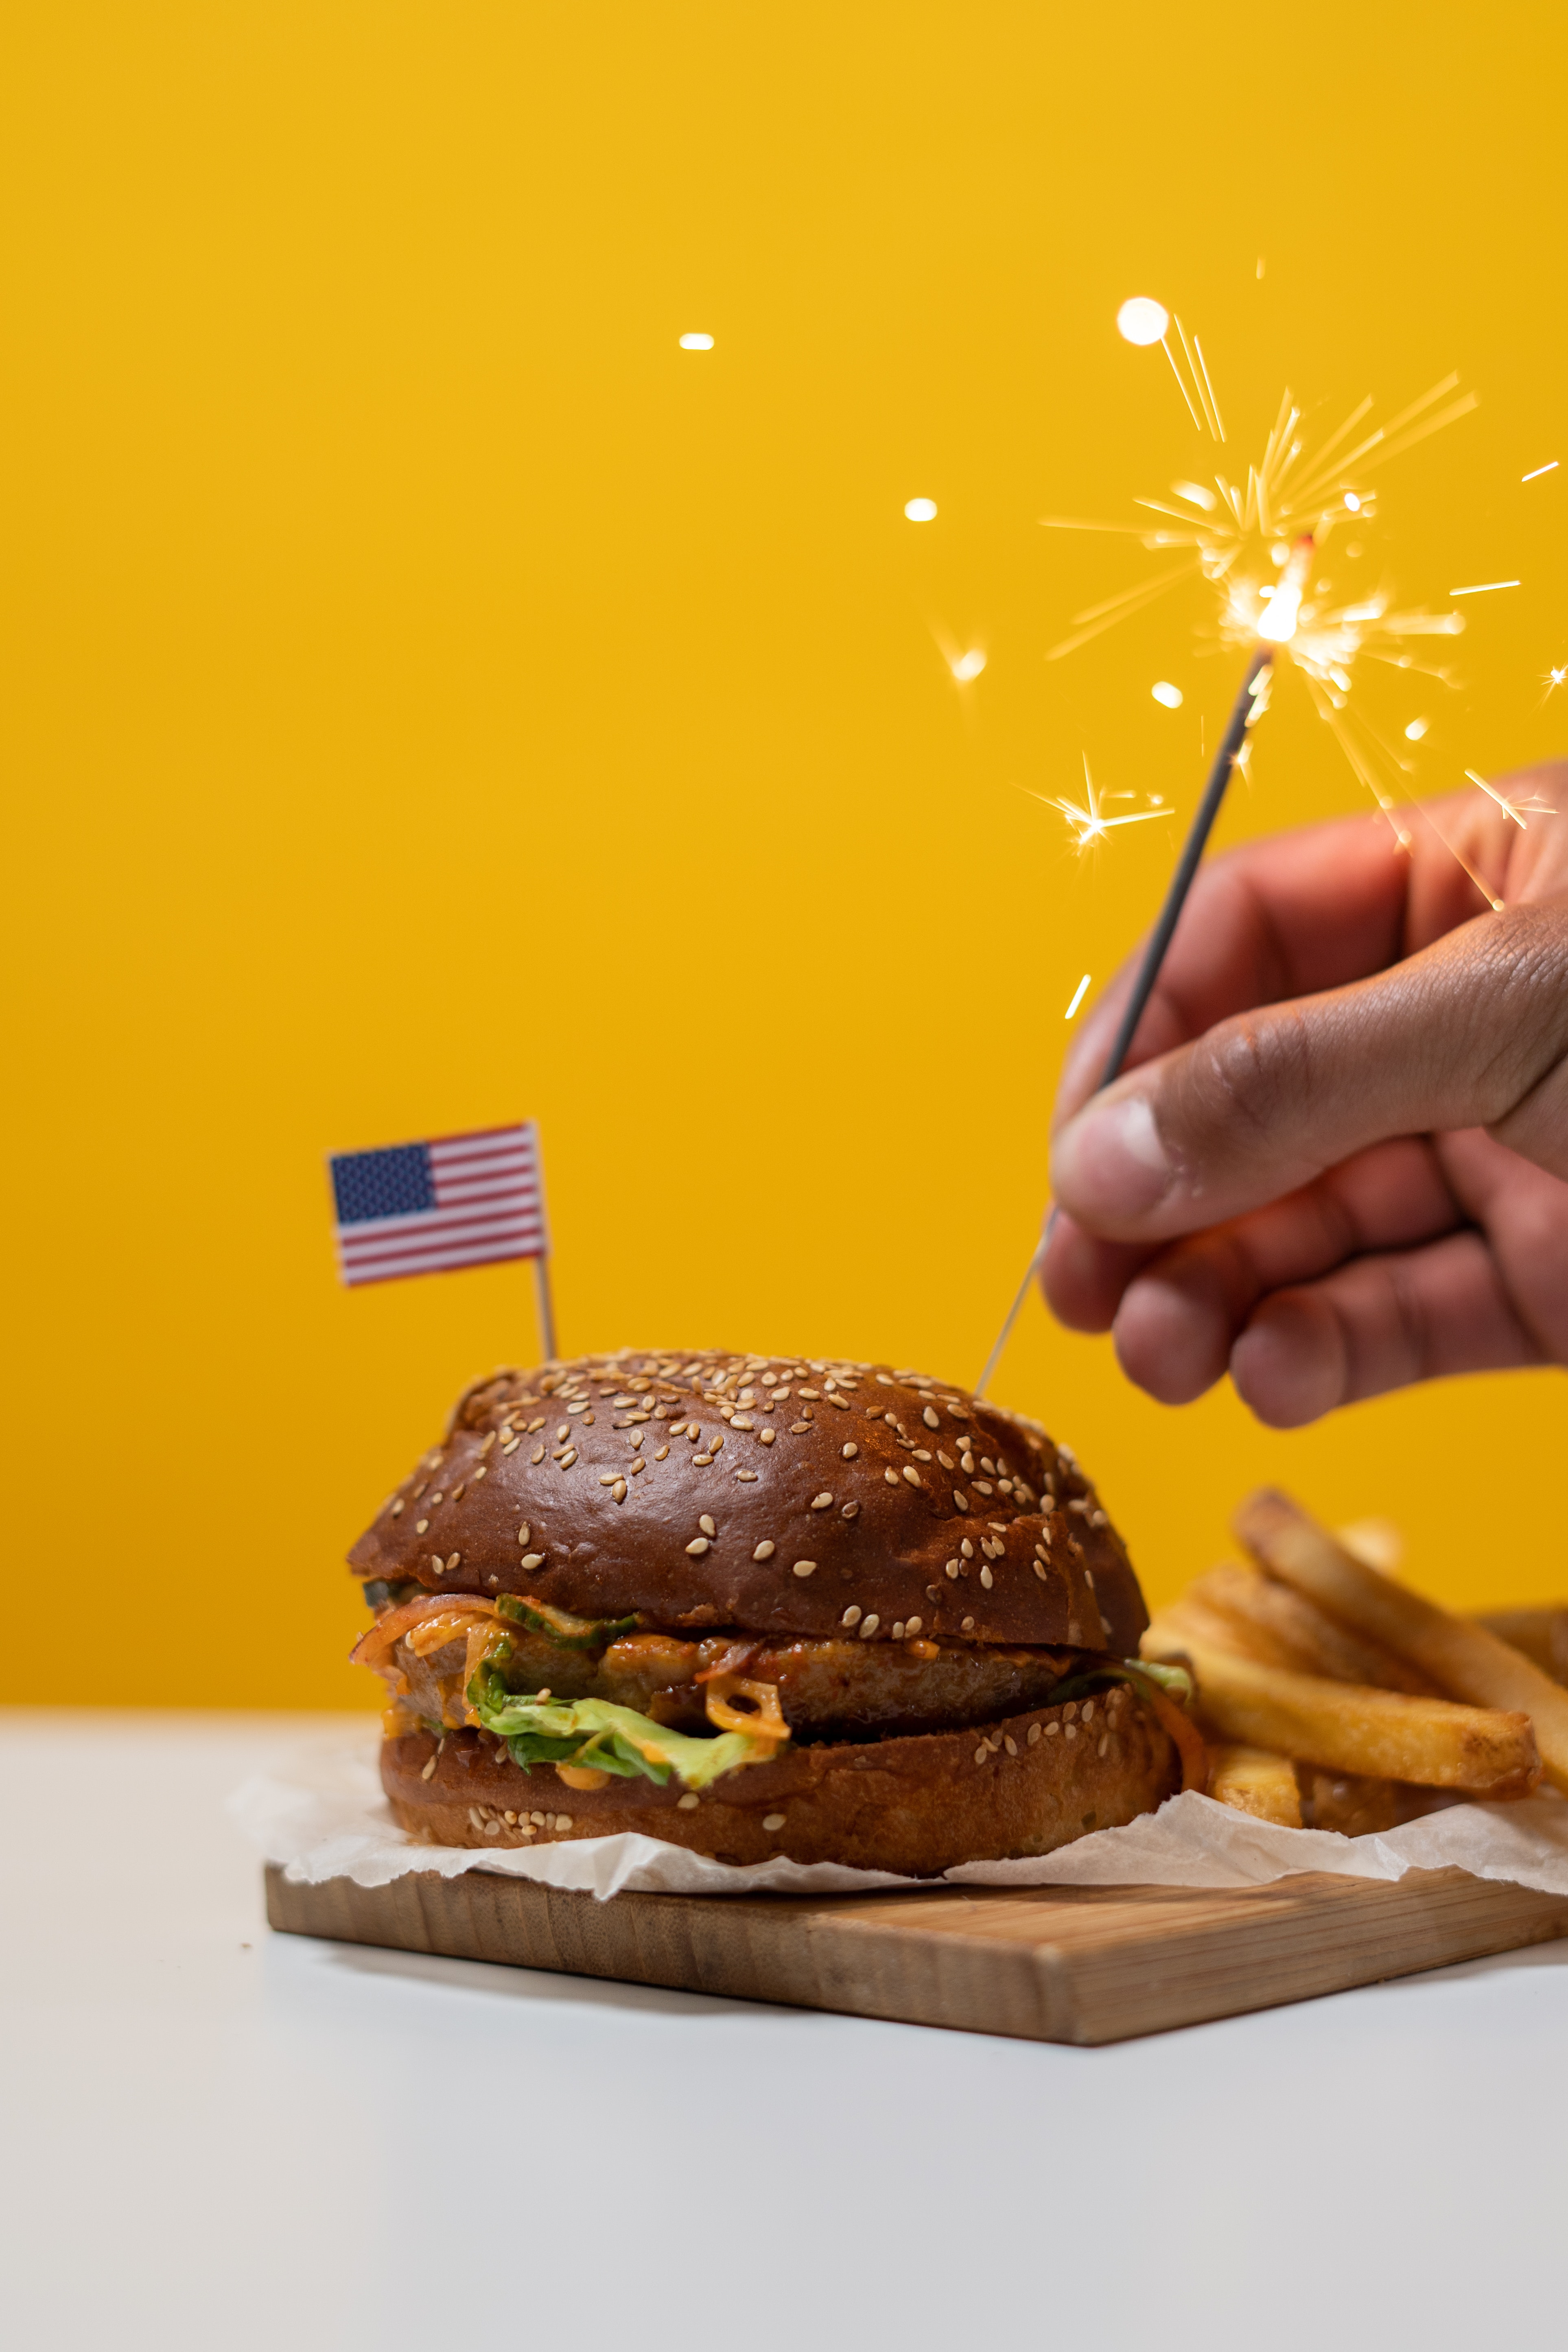 What Makes a Great Burger? Deconstructing the American Favourite